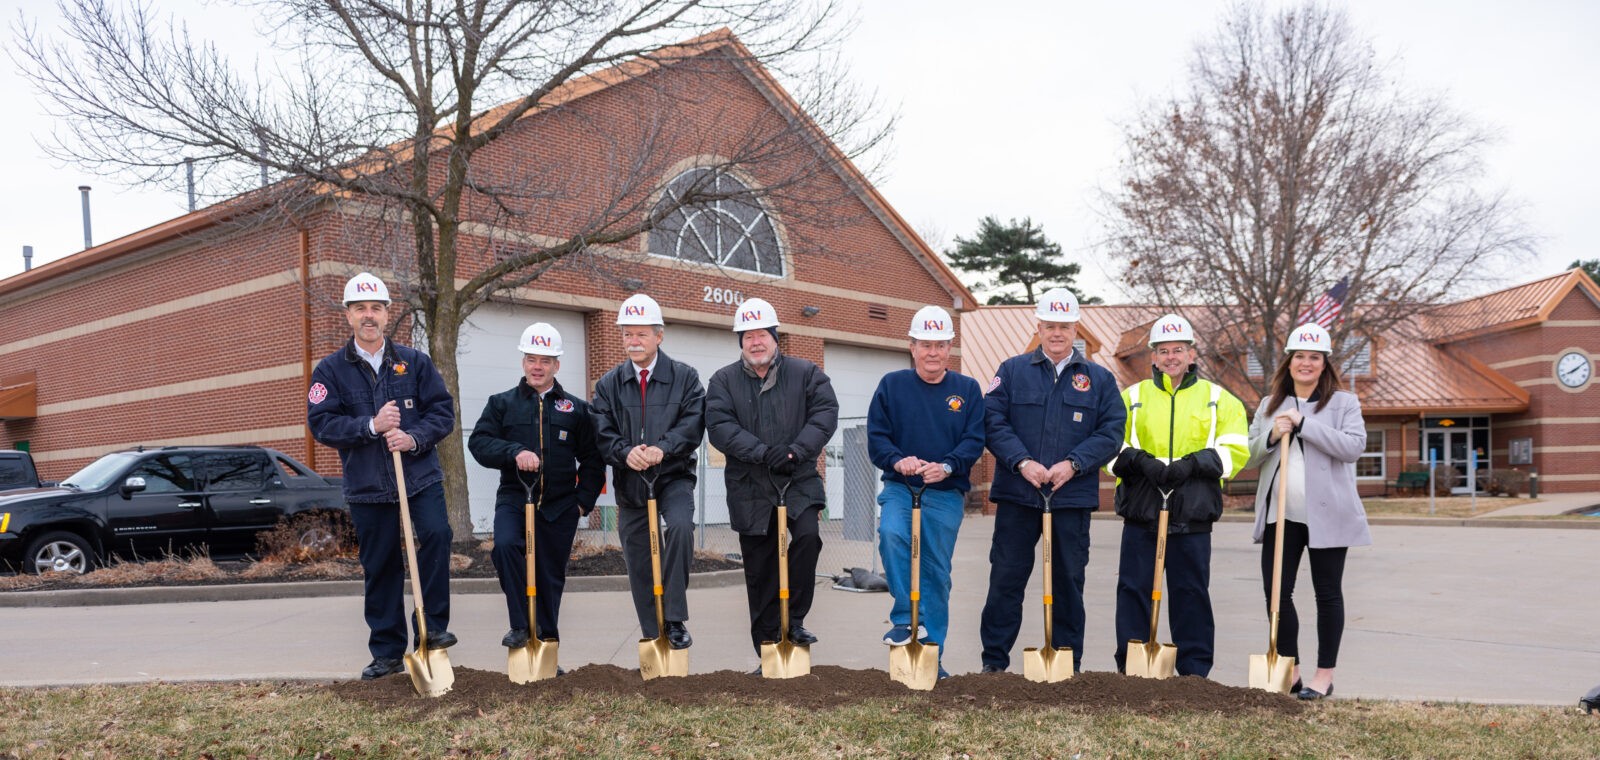 Maryland Heights Fire Protection District Headquarters Engine House One groundbreaking event 8 people with shovels and KAI hard hats